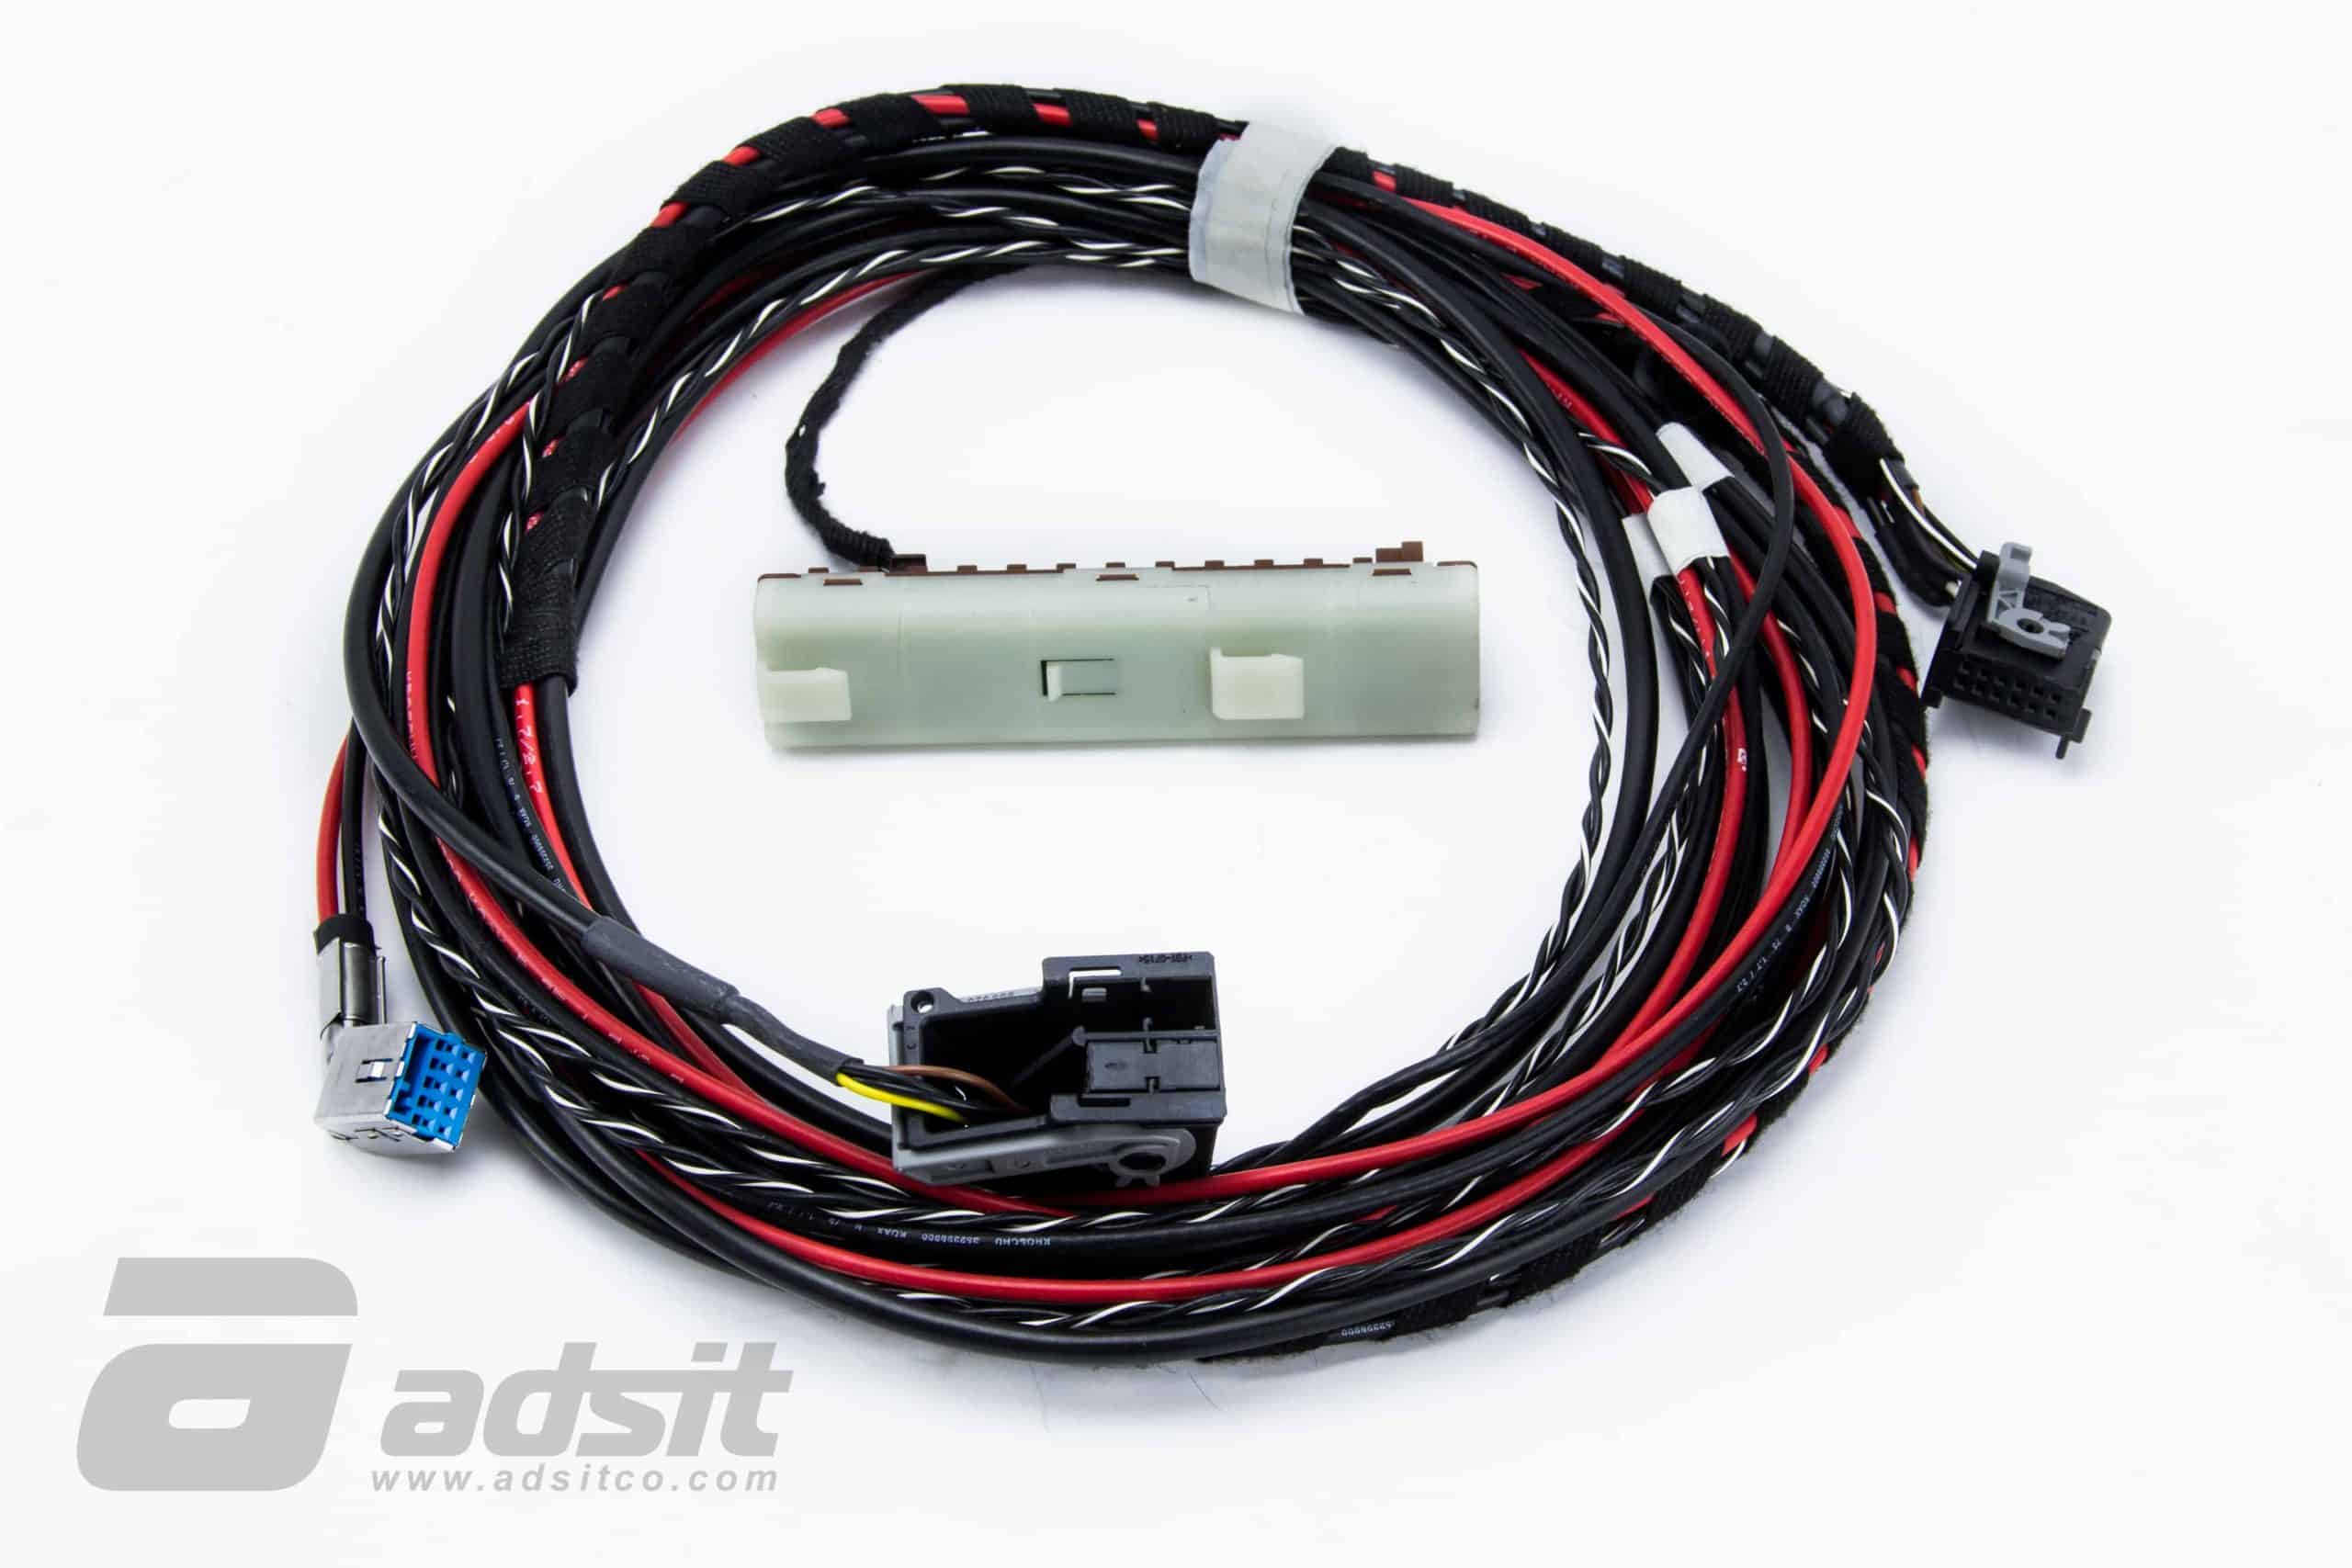 REAR ENTERTAINMENT CABLE HARNESS